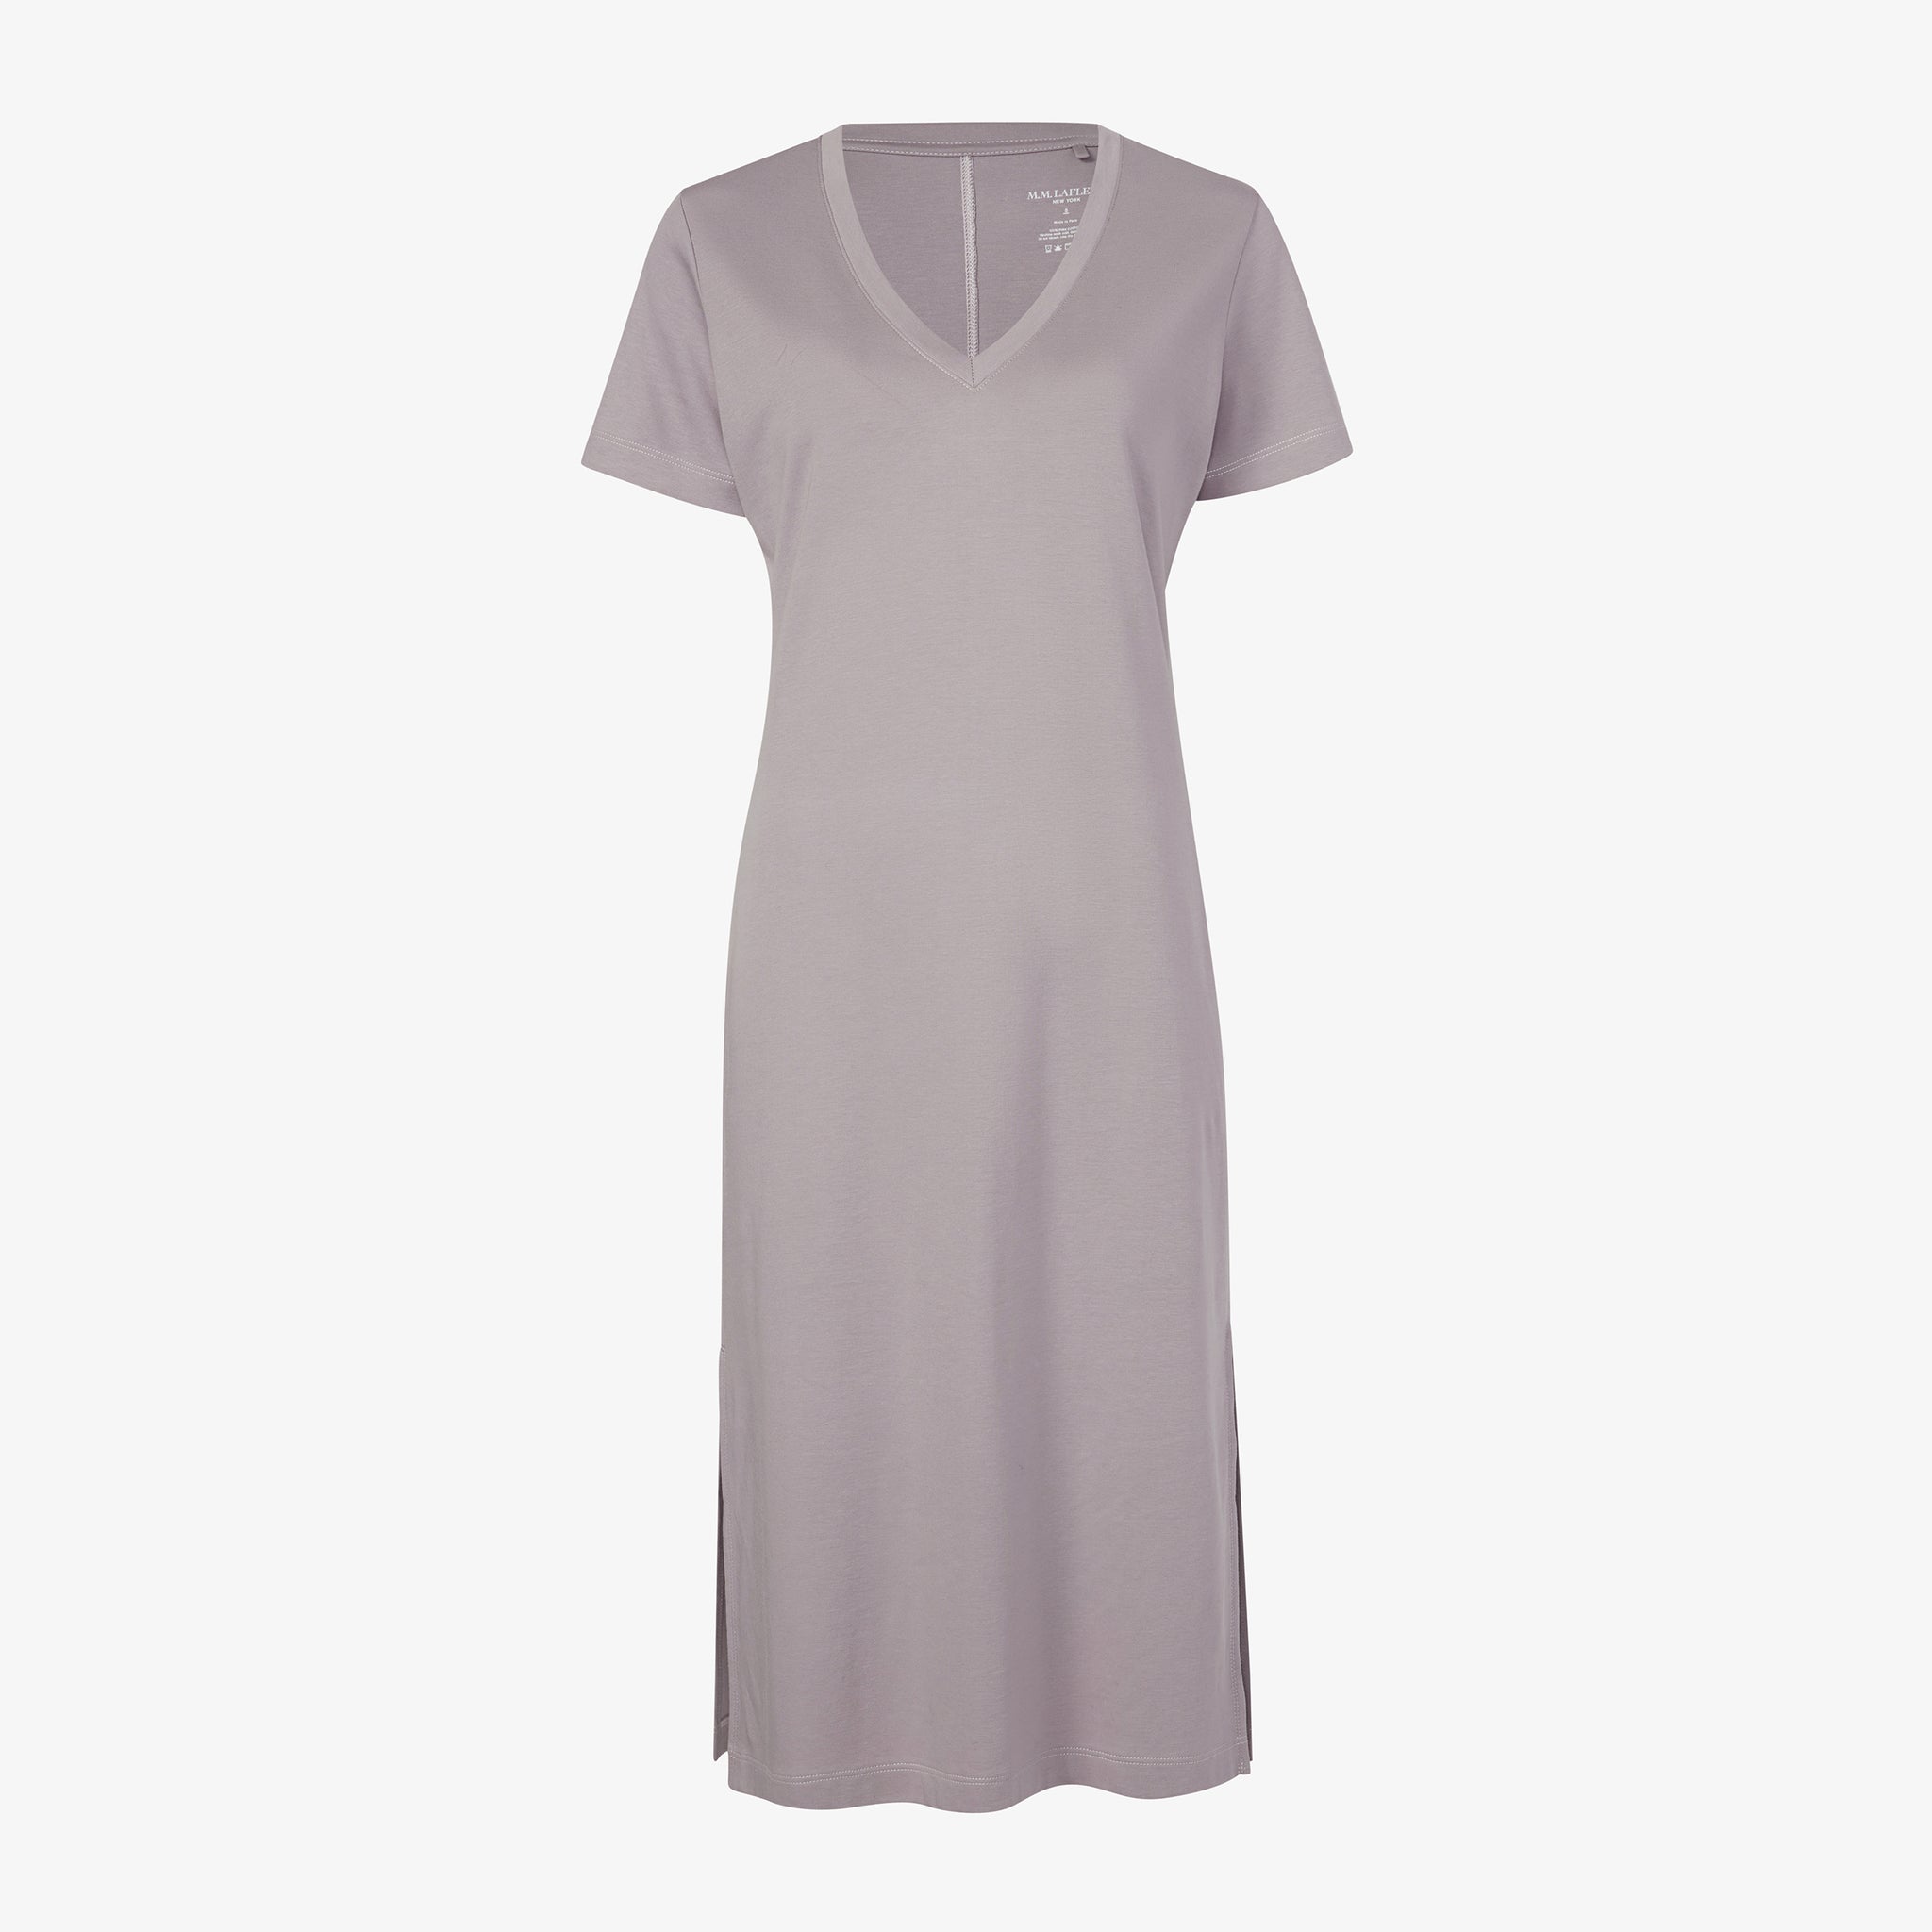 Packshot image of the Renee Dress - Pima Cotton in Wisteria